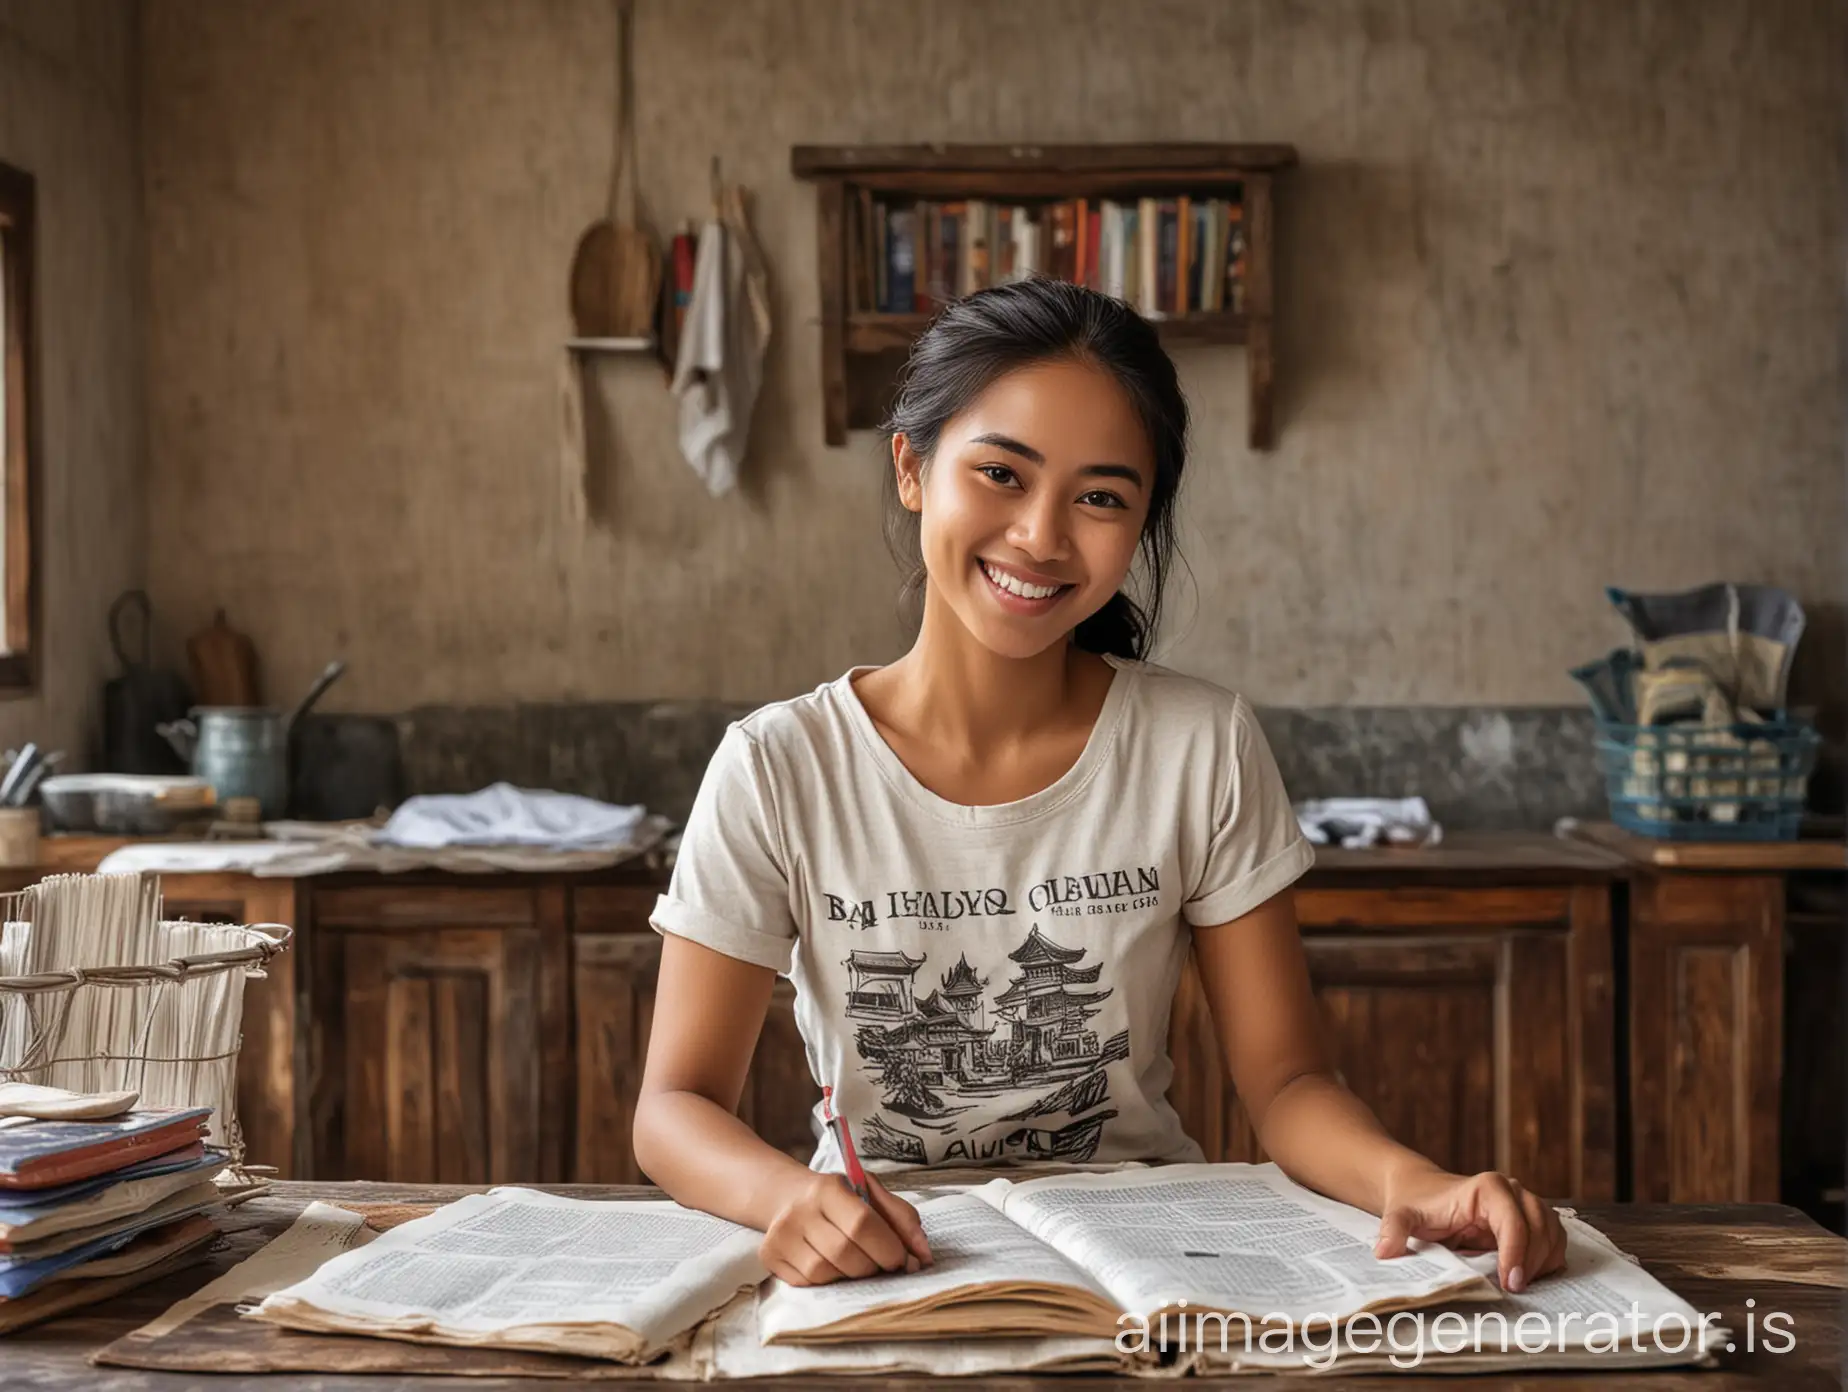 Create a high realistic image of a young attractive Balinese woman wearing Bali T-Shirt. She is working and studying books. Background shows laundry and kitchen cleaning. Smiling;attractive;optimist